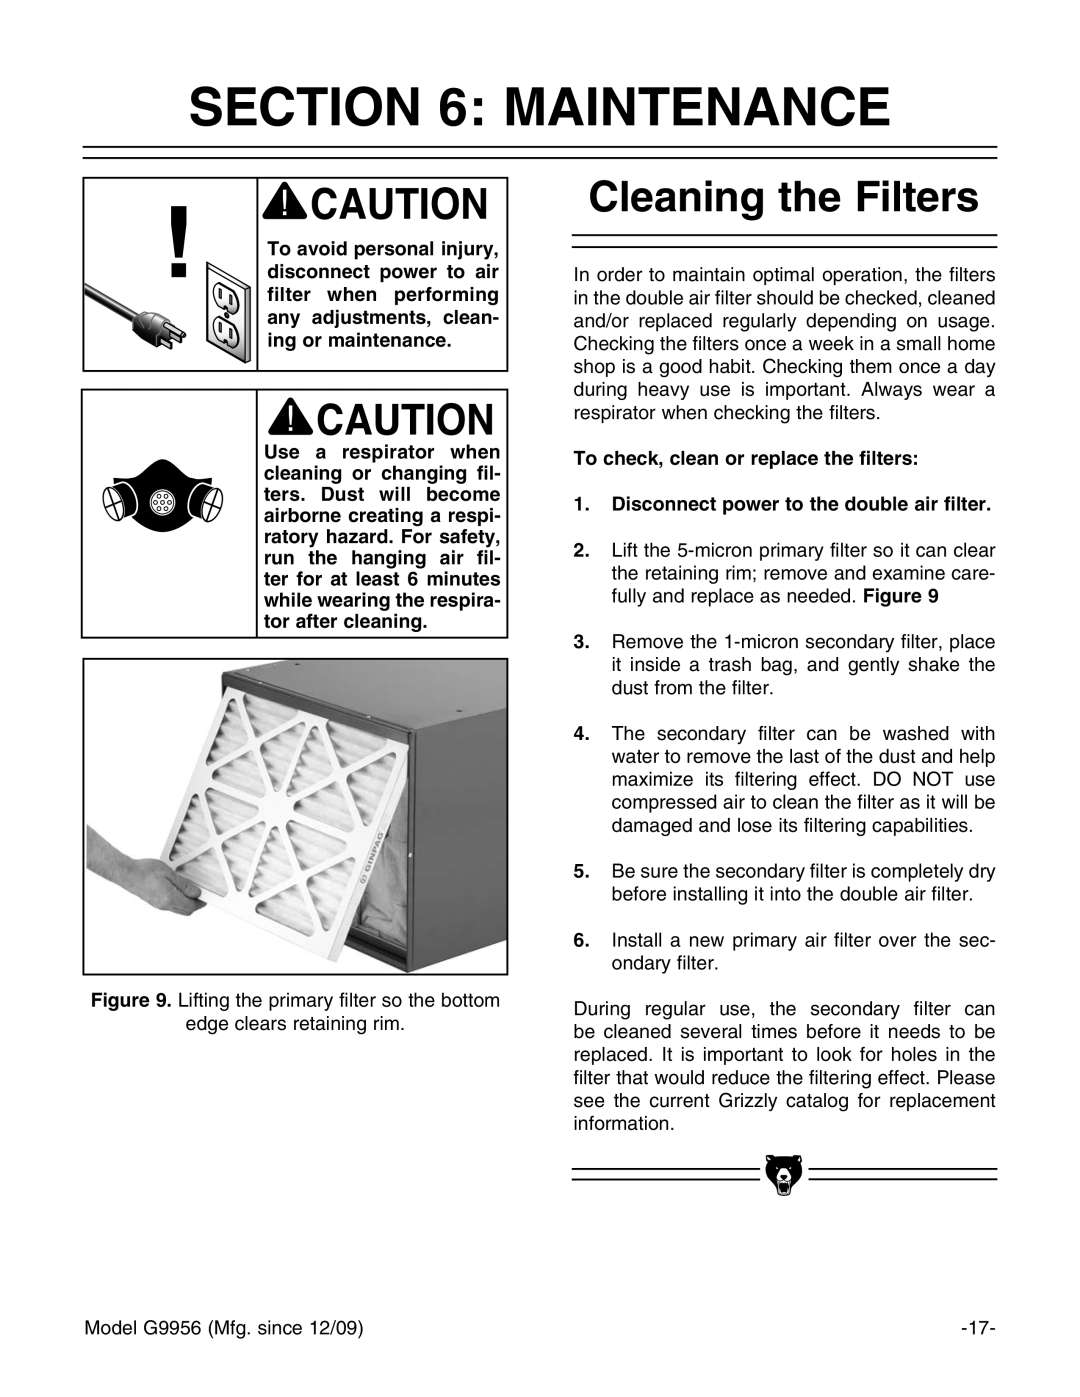 Grizzly G9956 instruction manual Maintenance, Cleaning the Filters 